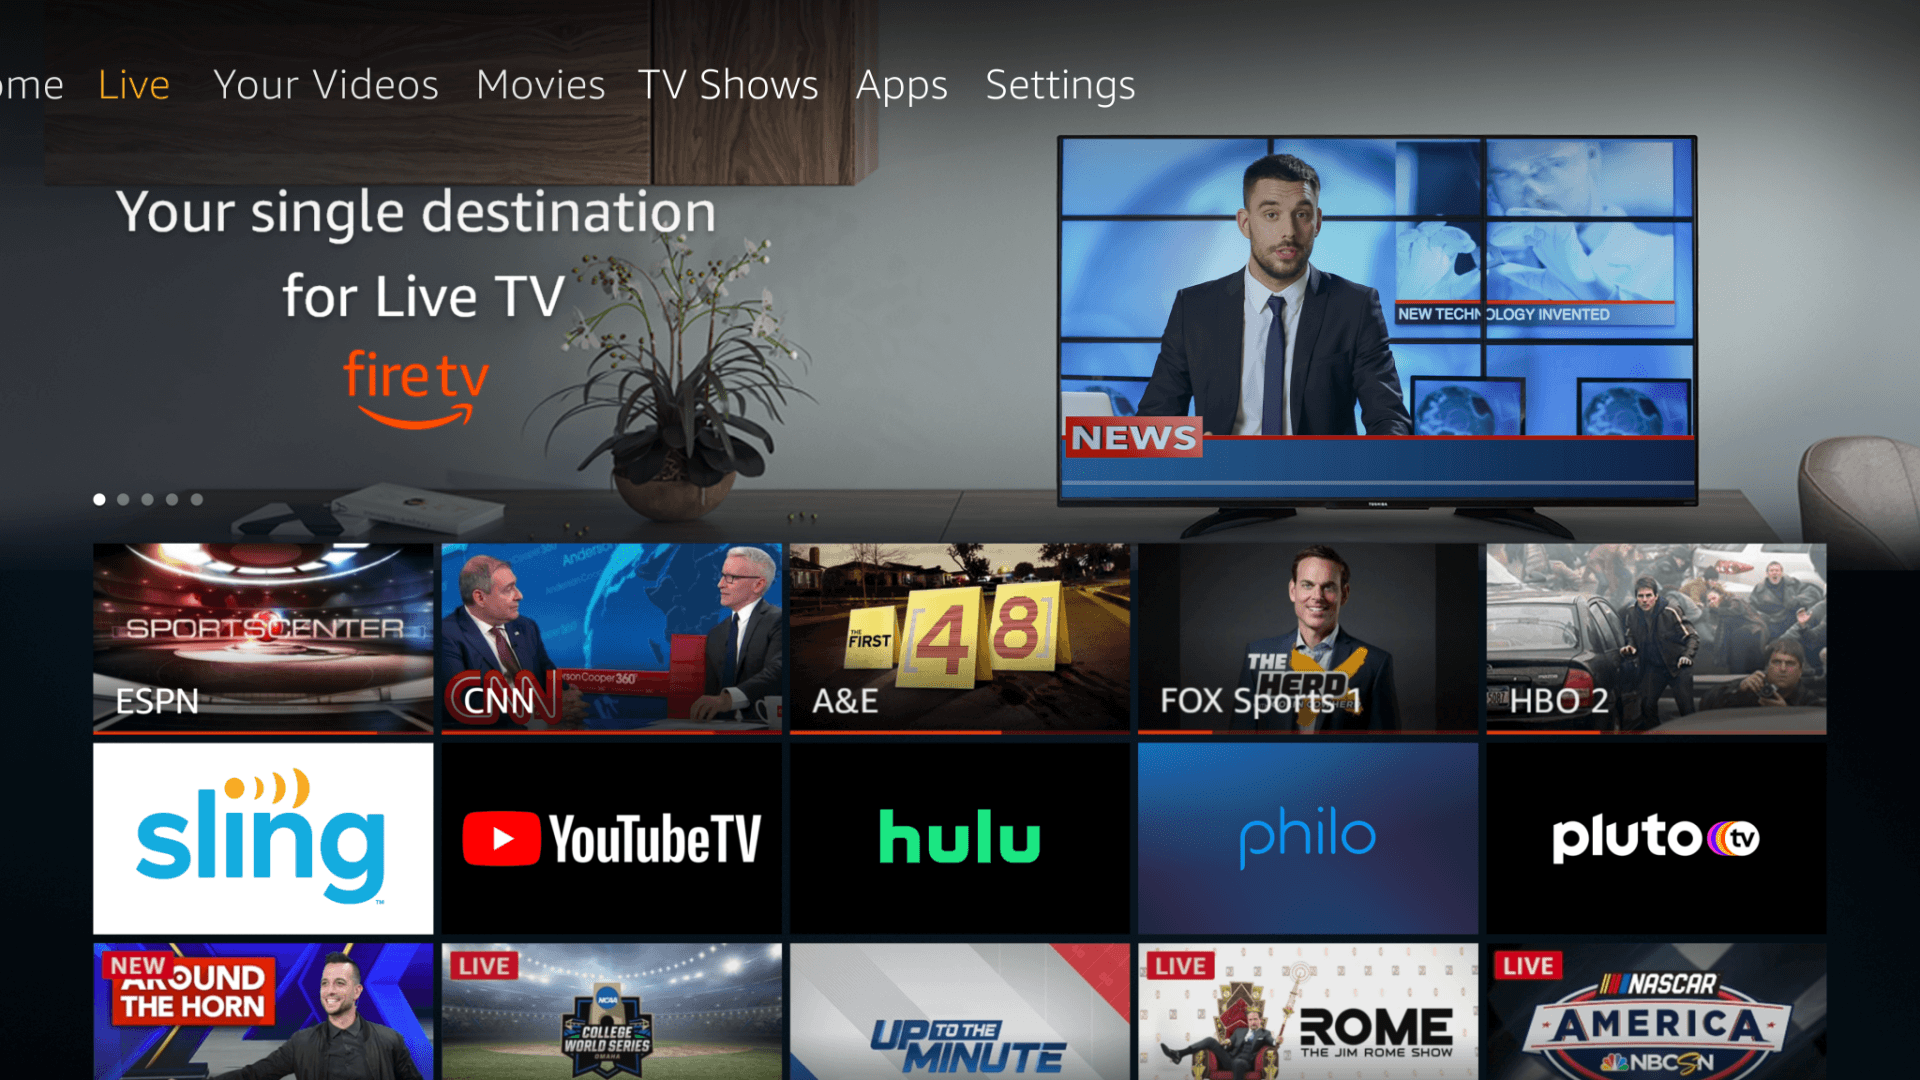 Amazon Integrates Hulu with Live, YouTube TV, and Sling TV Into Fire TV’s Live Experience